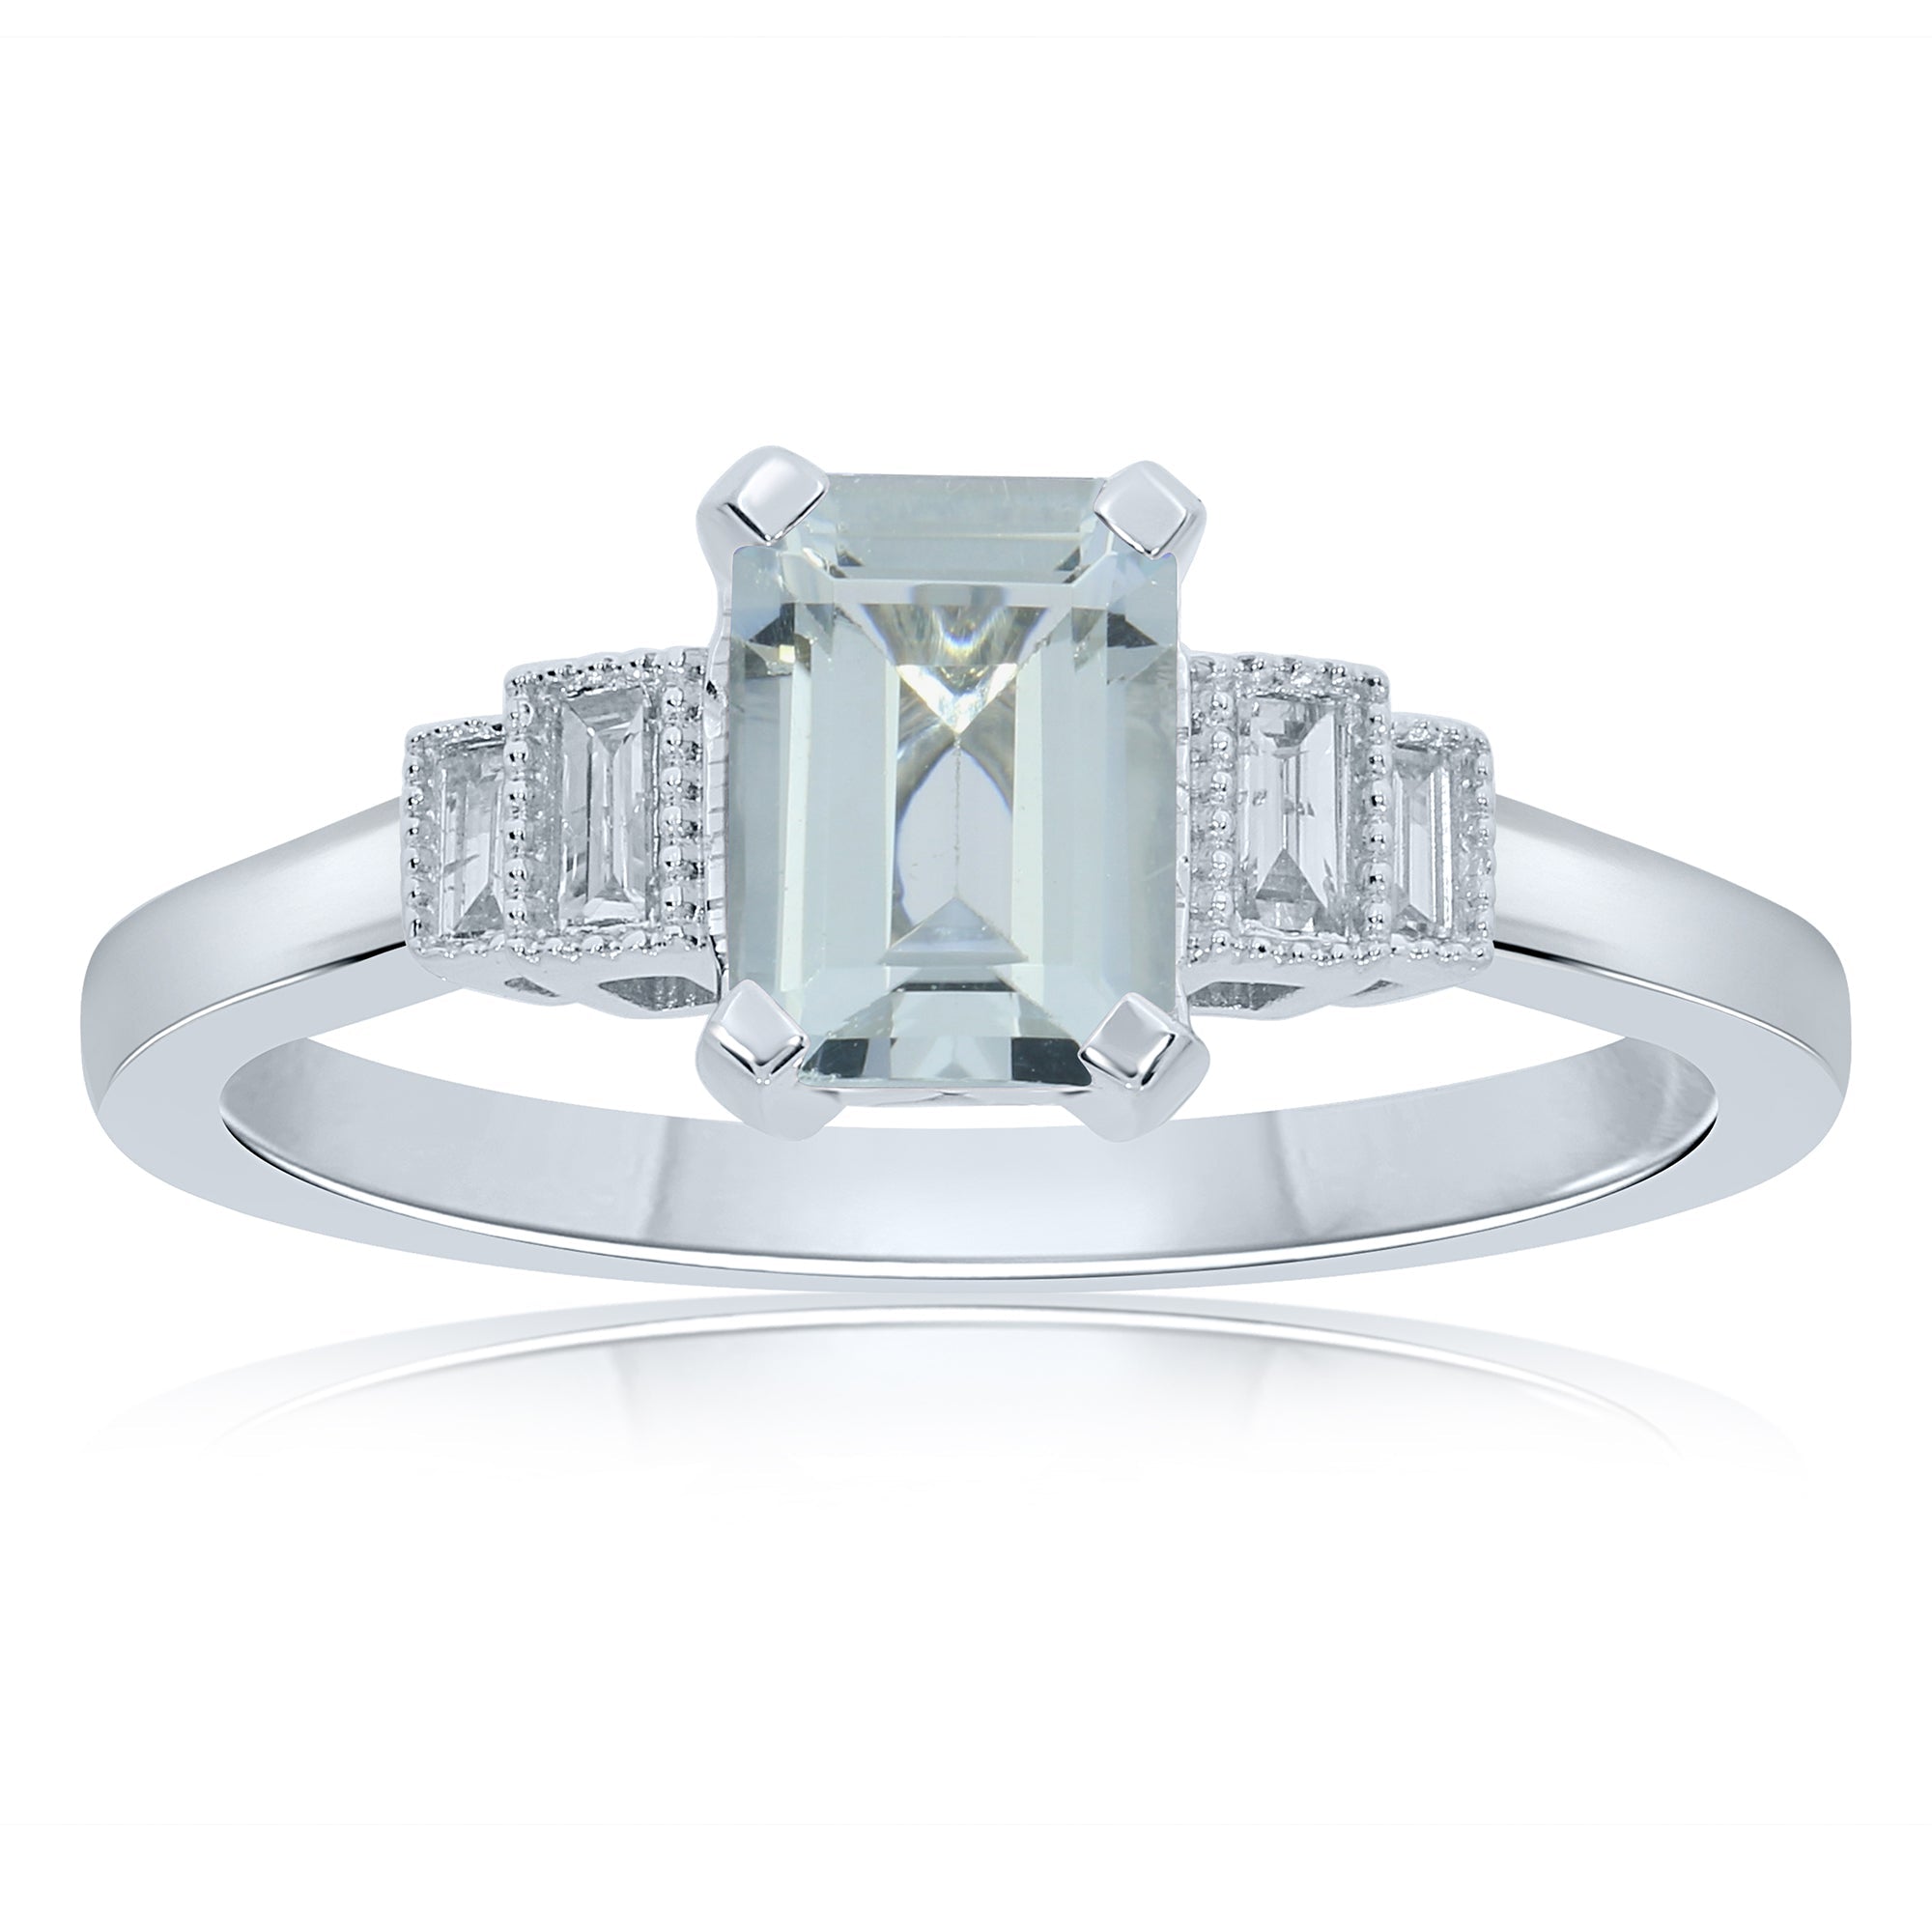 9ct white gold 7x5mm octagon cut aquamarine & stepped diamond shoulders ring 0.11ct